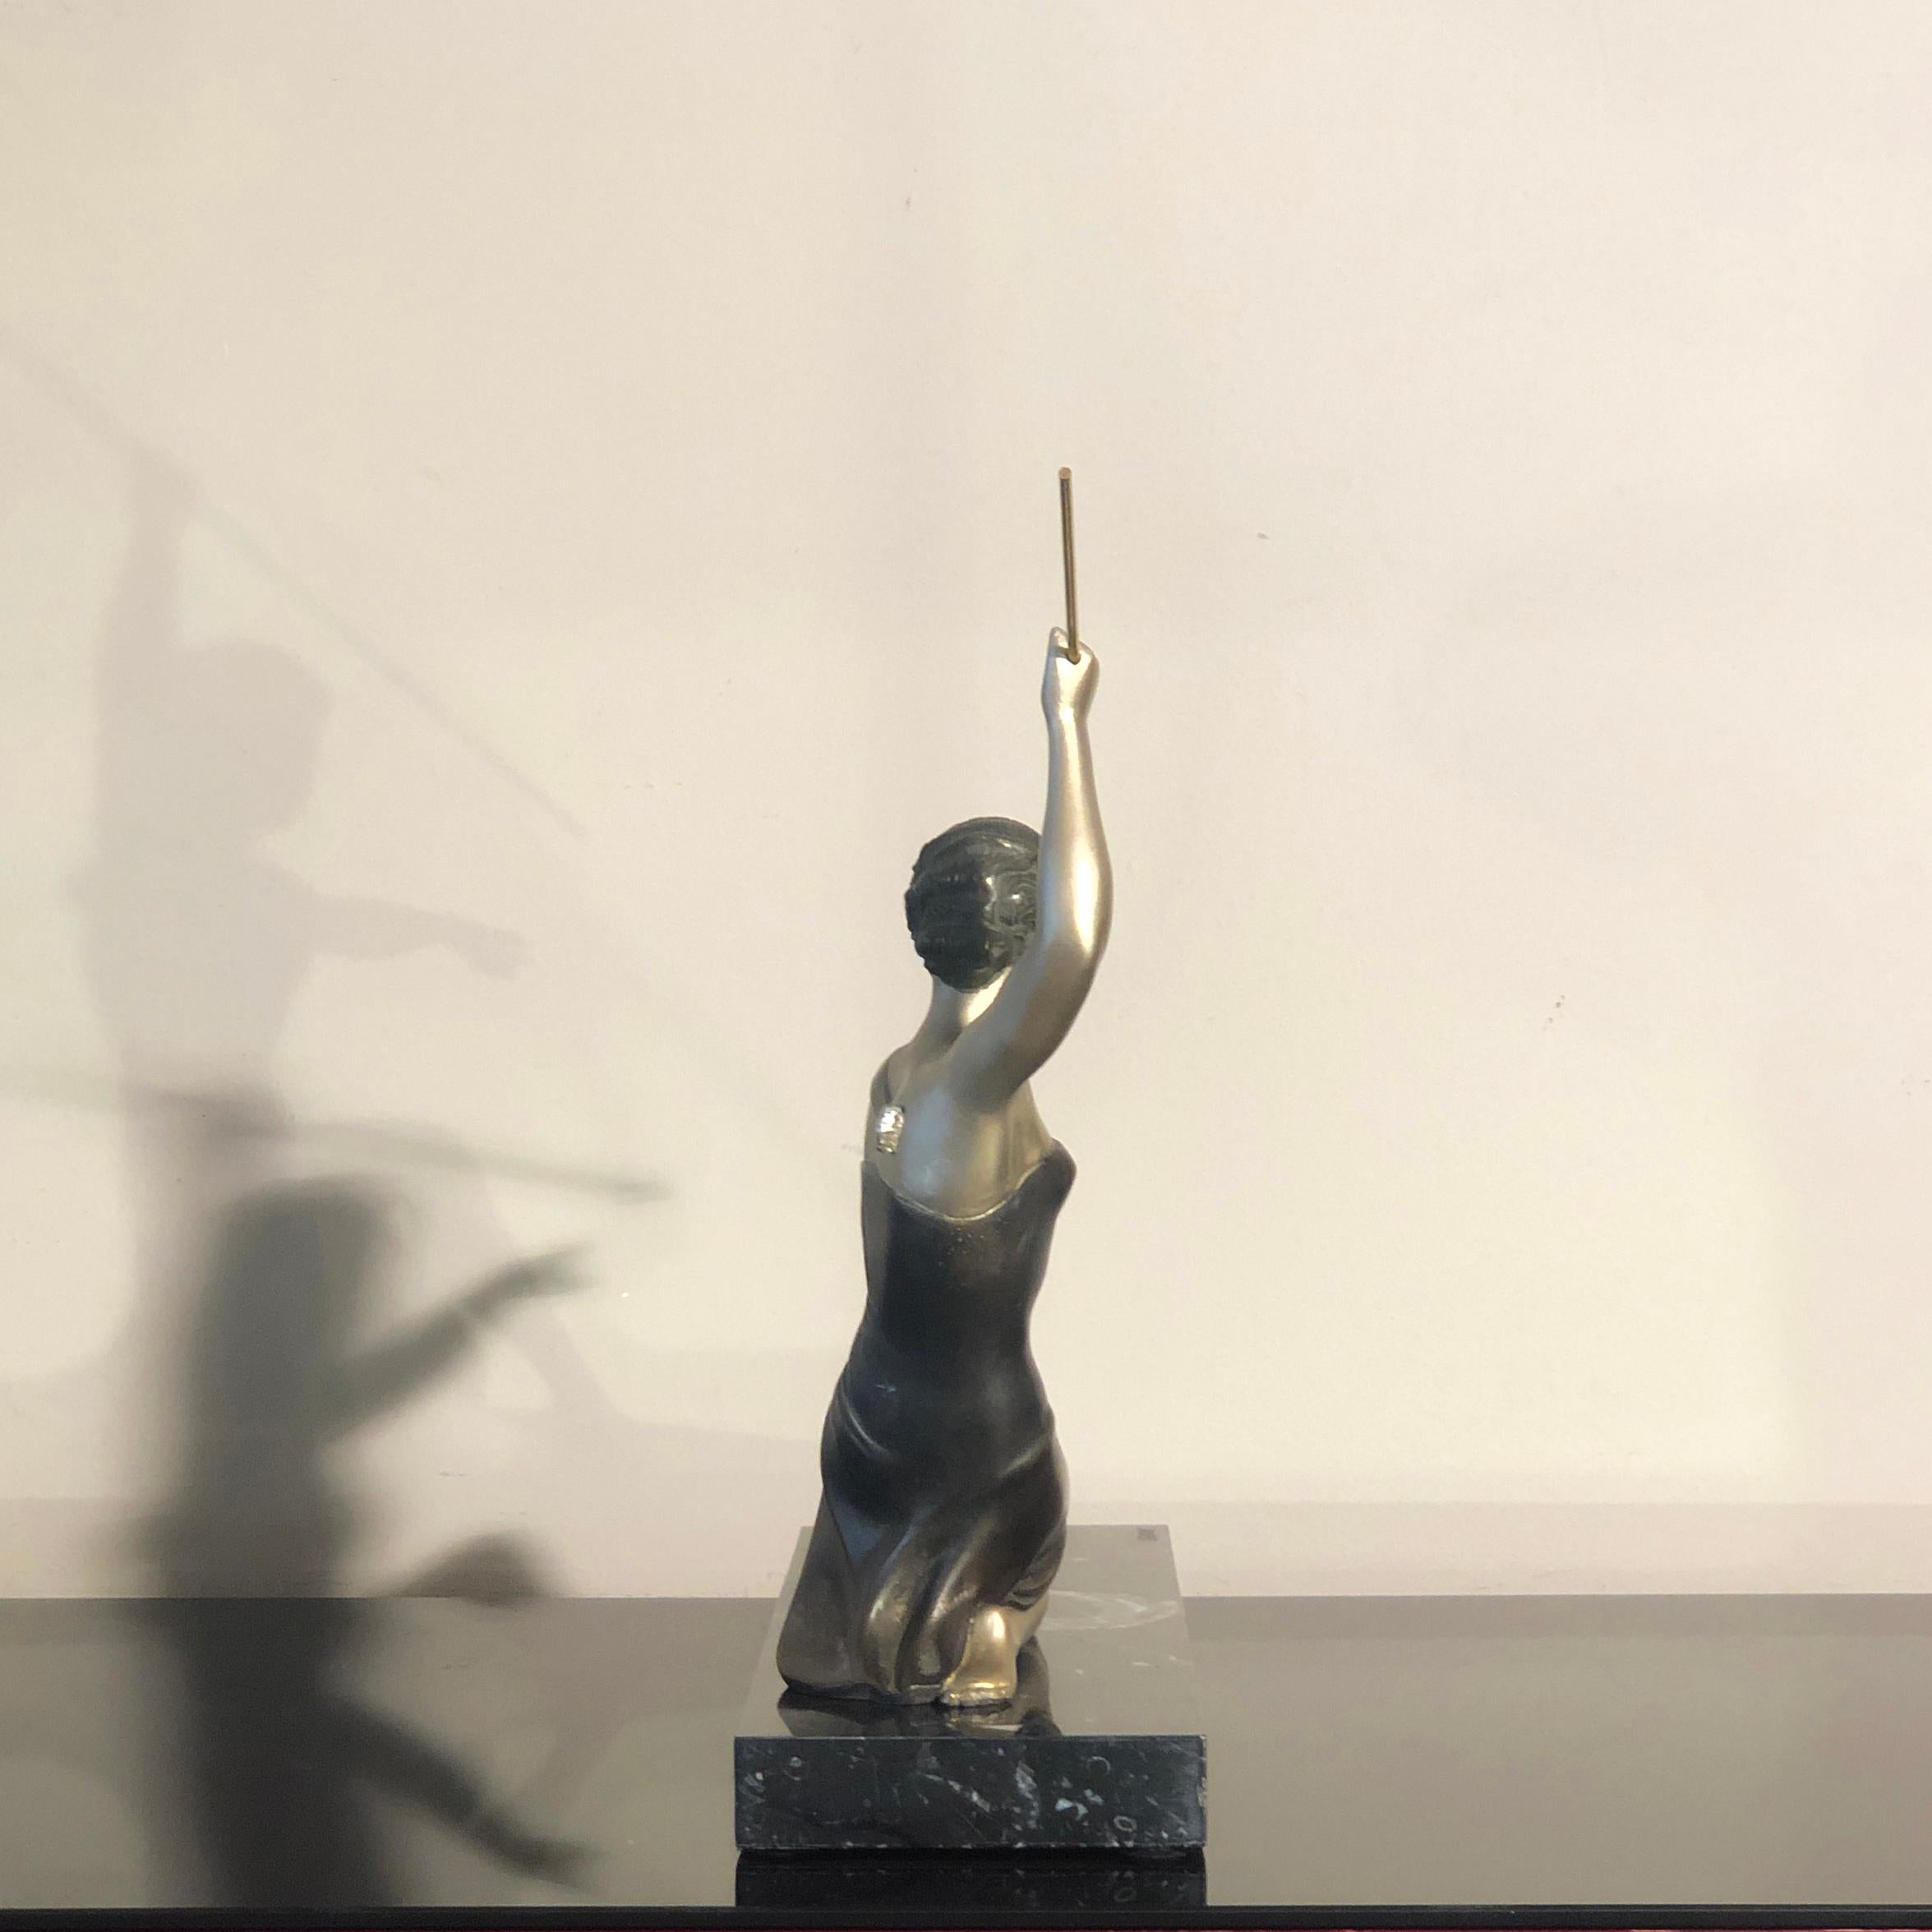 Diana the Huntress represented in this sculpture made and signed by Uriano (Ugo Cipriani) an Italian artist active in France during the Art Deco period (1930s). The sculpture is made in bronze on a marble base. The bronze is lacquered in different